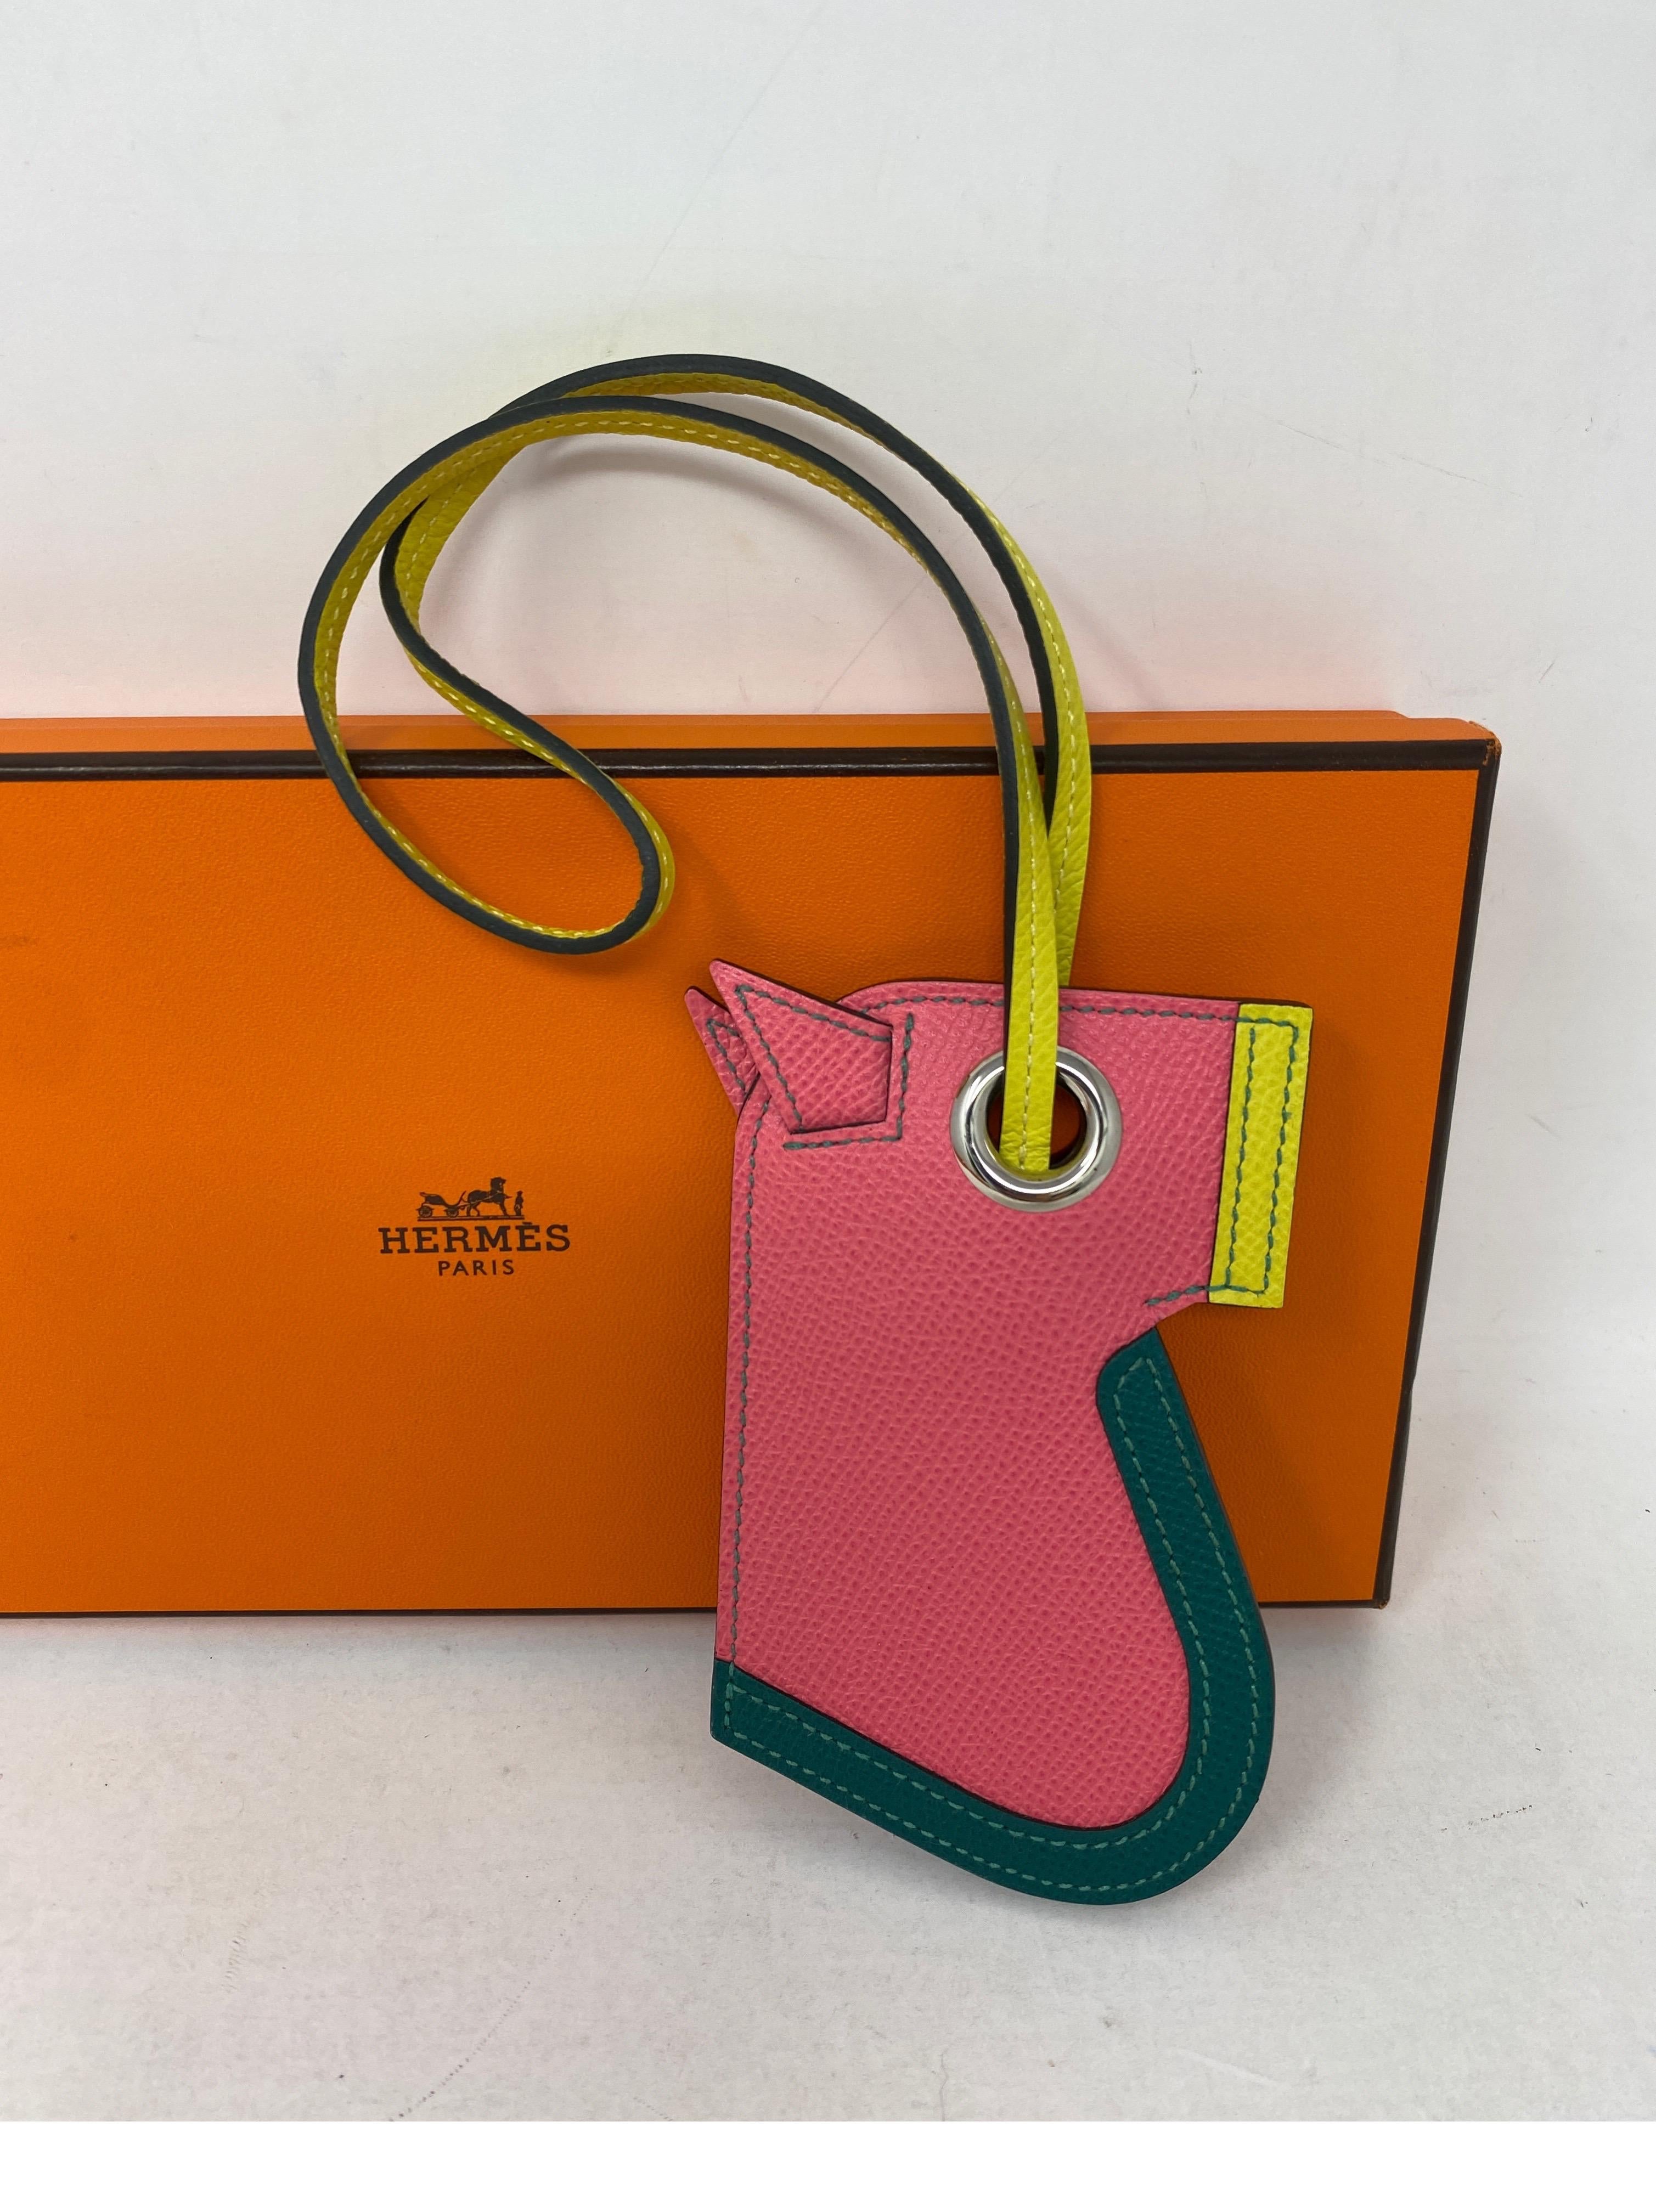 Hermes Horse Purse Charm holder. Pink leather horse head with yellow and green trim. New condition. Rare and limited horse charm. Guaranteed authentic. 